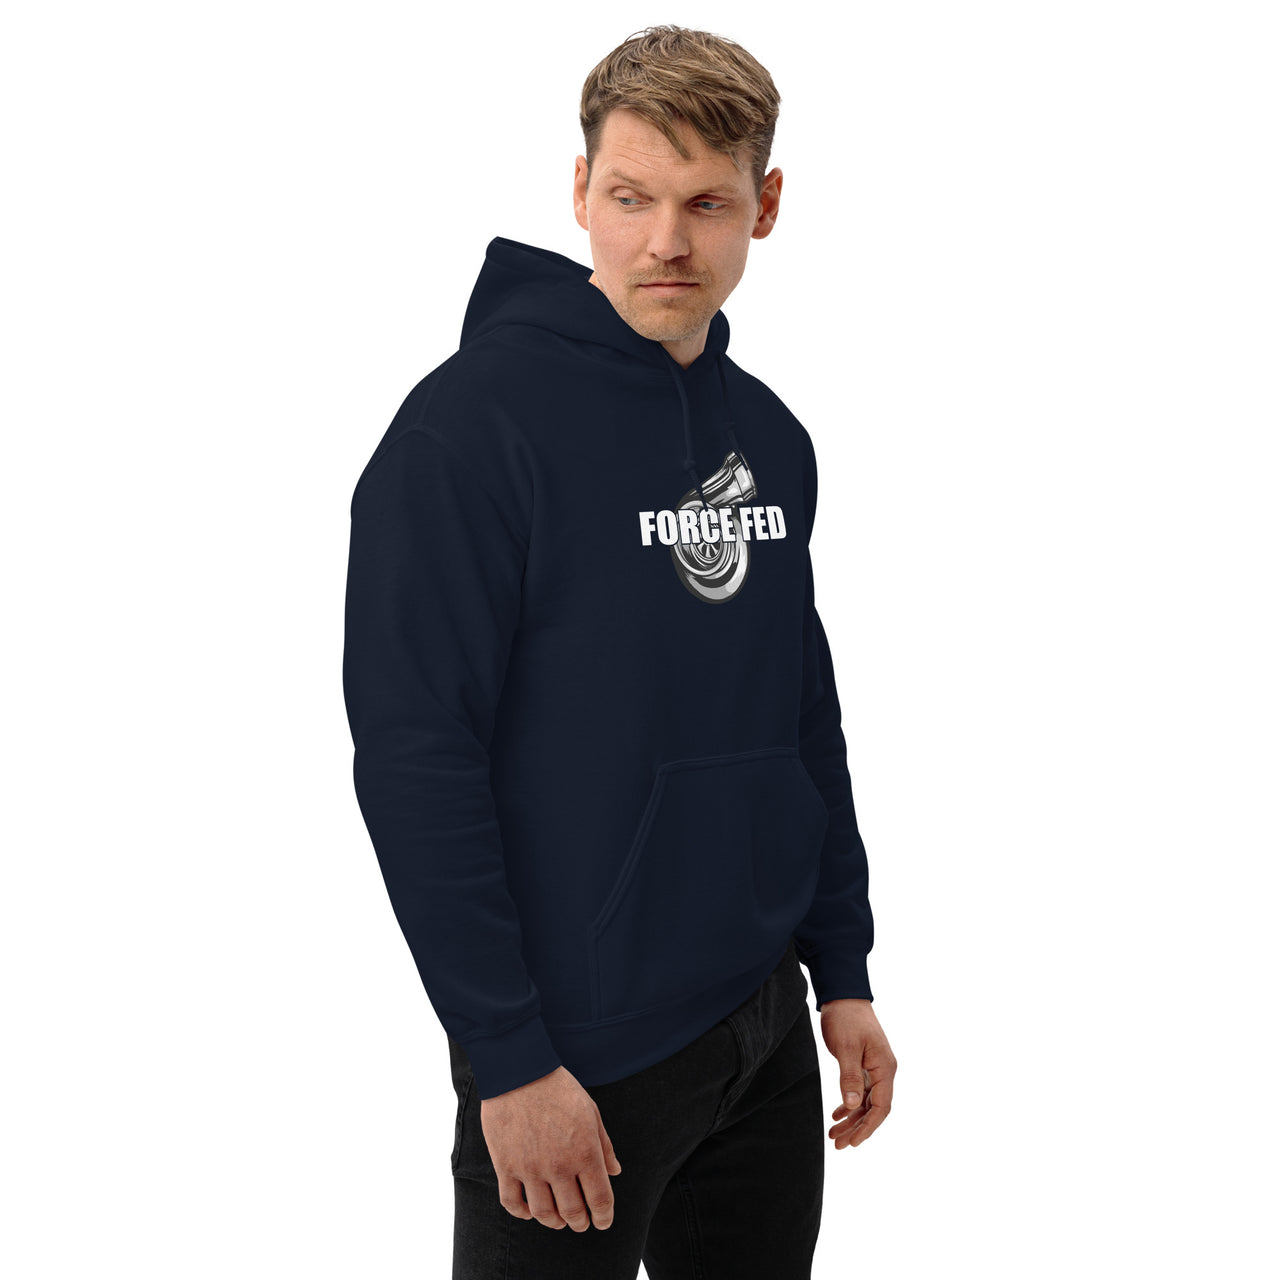 Turbo Hoodie For Car Guy Force Fed